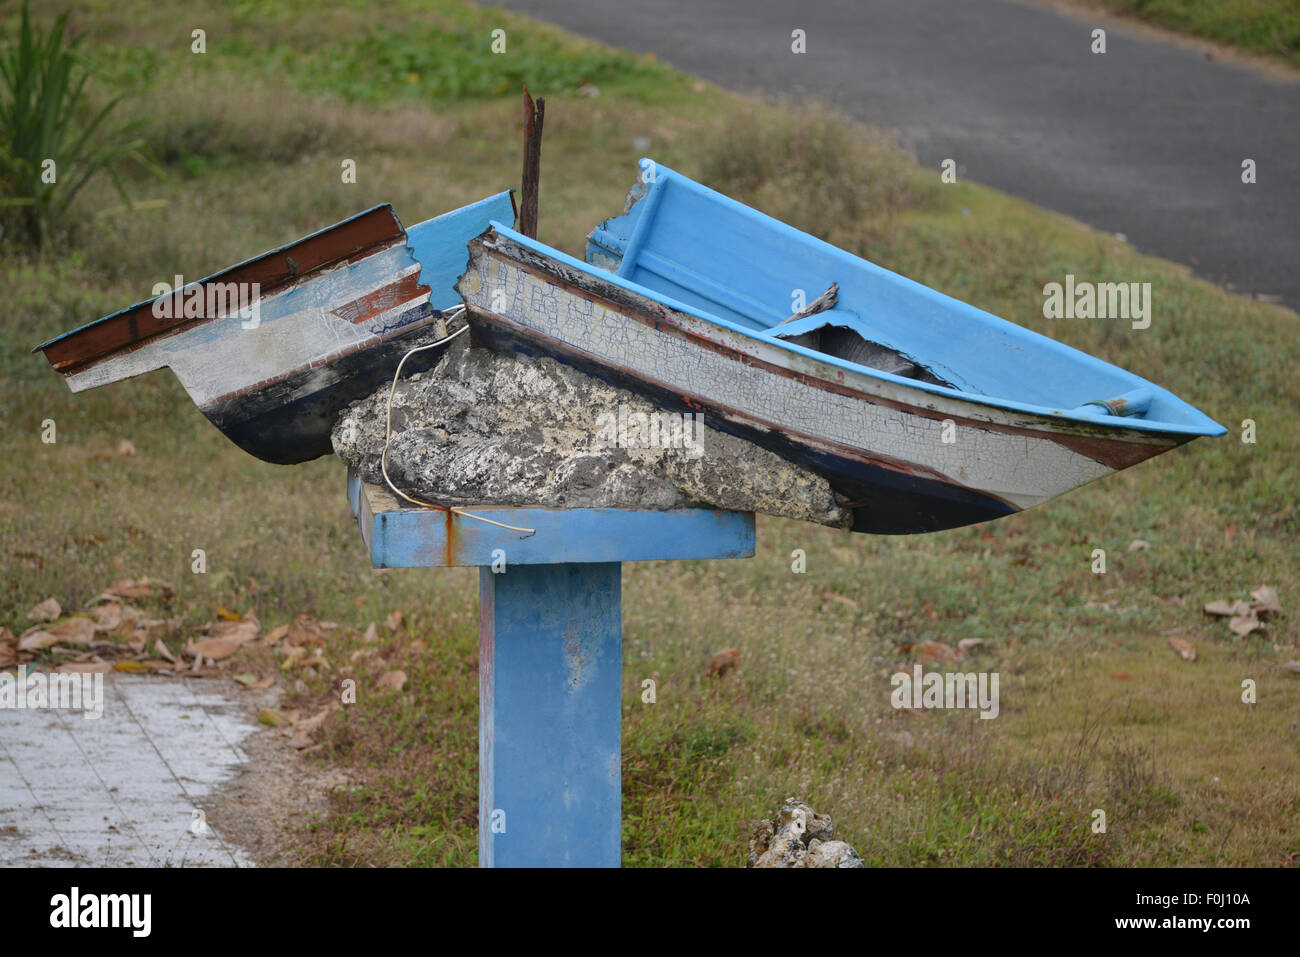 A tsunami damaged boat from 2006, along the coast in Pangandaran, West Java, Indonesia on August 10, 2015. Stock Photo